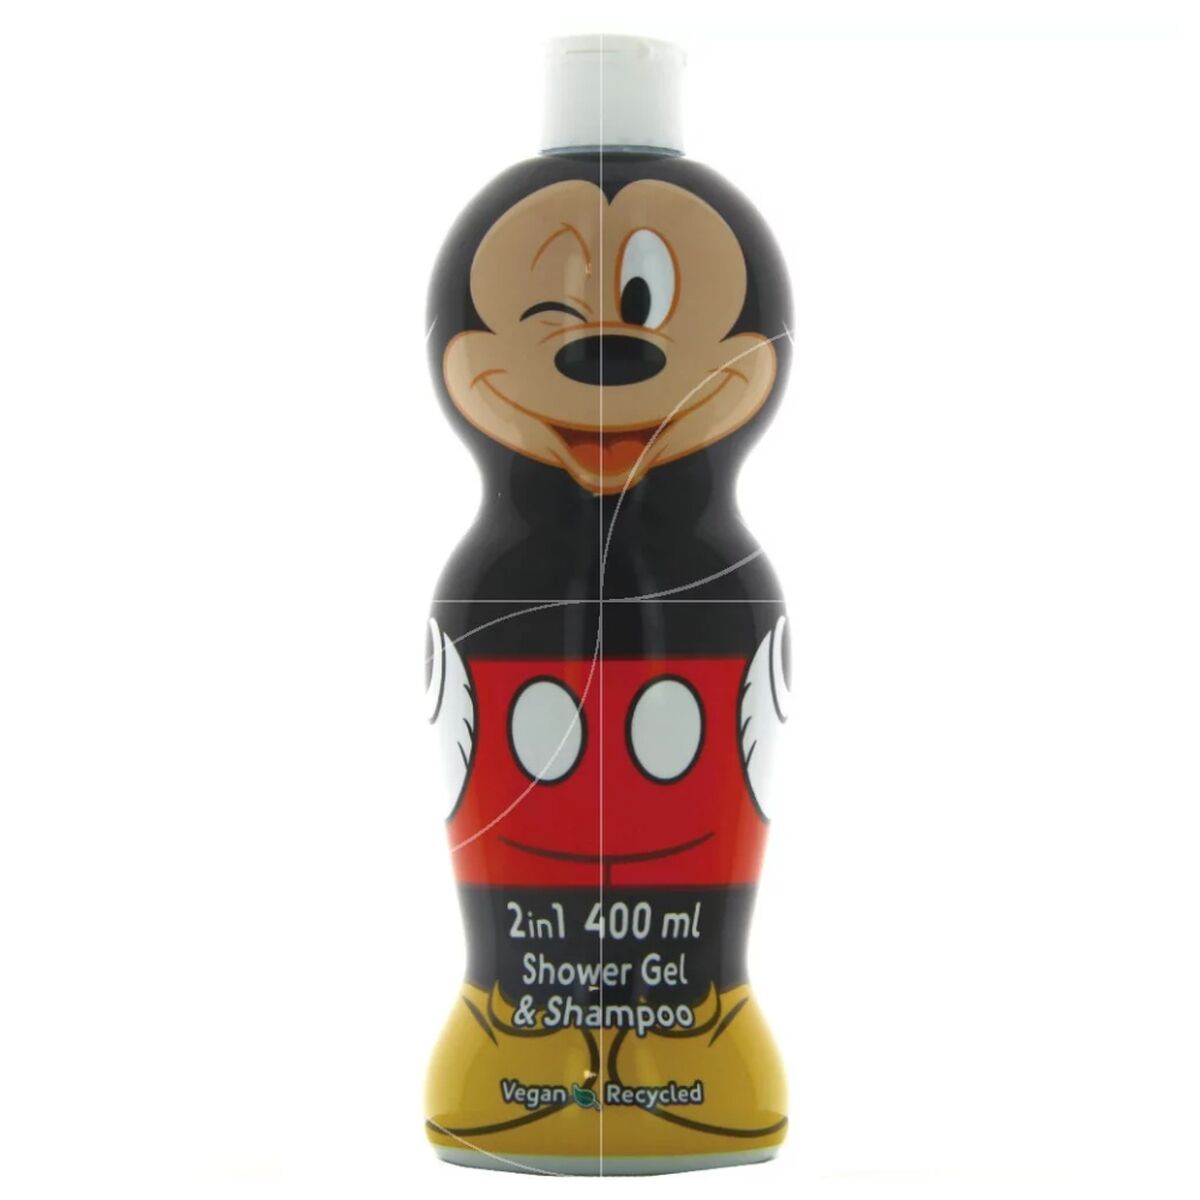 2-in-1 Gel and Shampoo Air-Val Mickey Mouse 400 ml - Calm Beauty IE